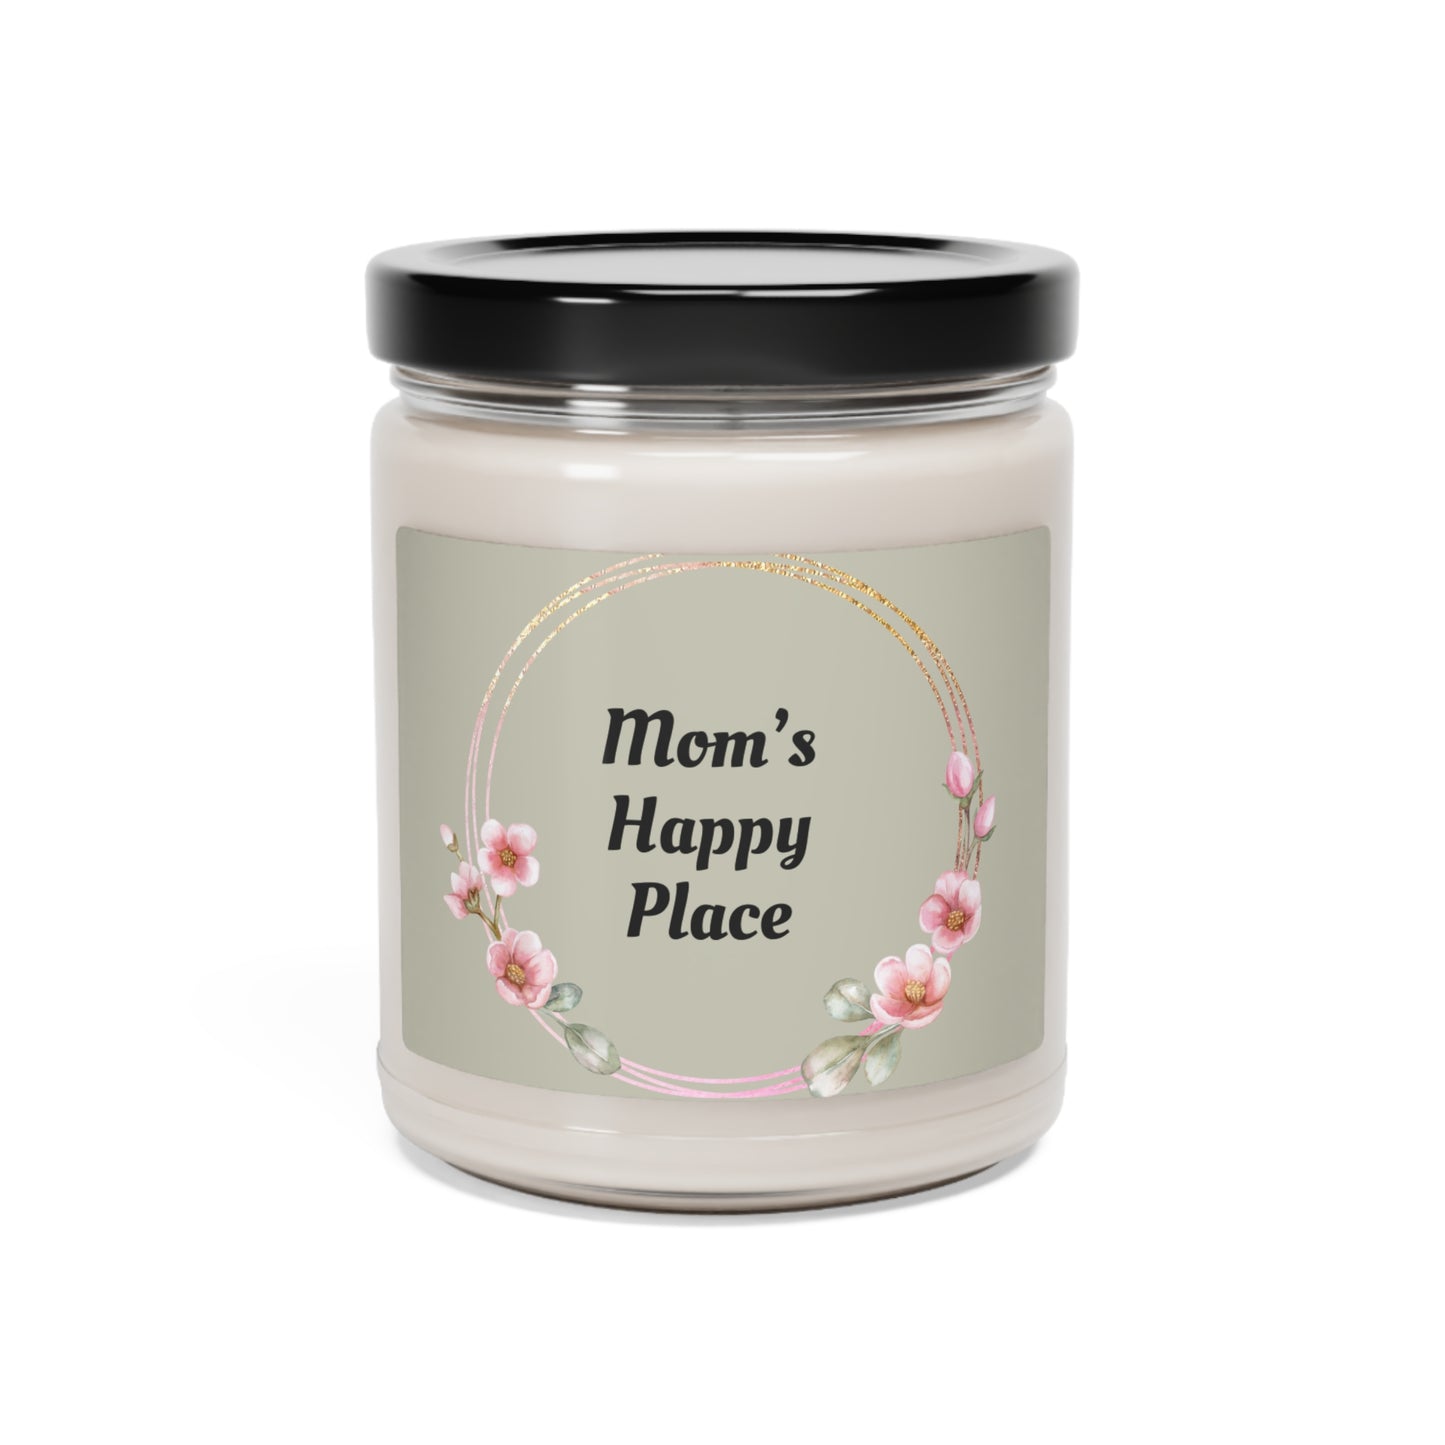 Mom's Happy Place-Scented Candle, 9oz